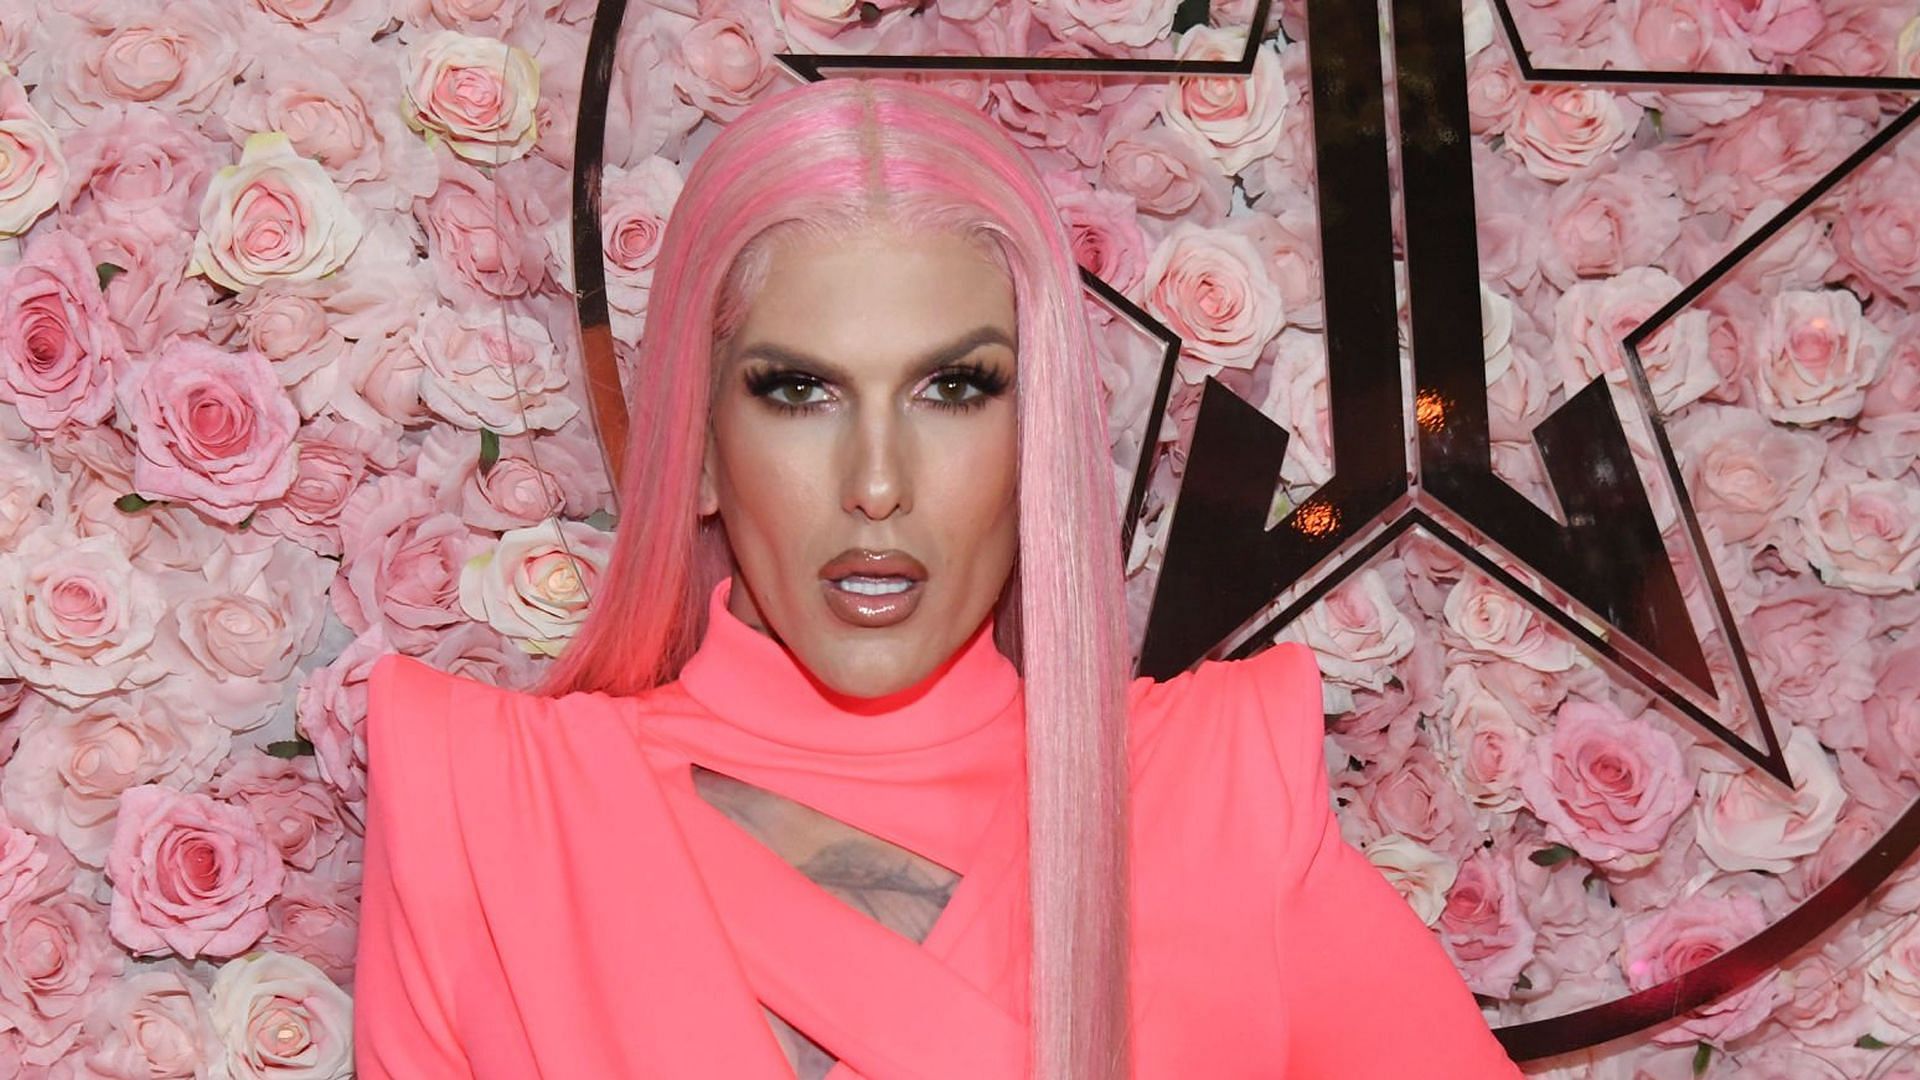 Jeffree Star faces heat online after conservative comments (Image via Getty Images)